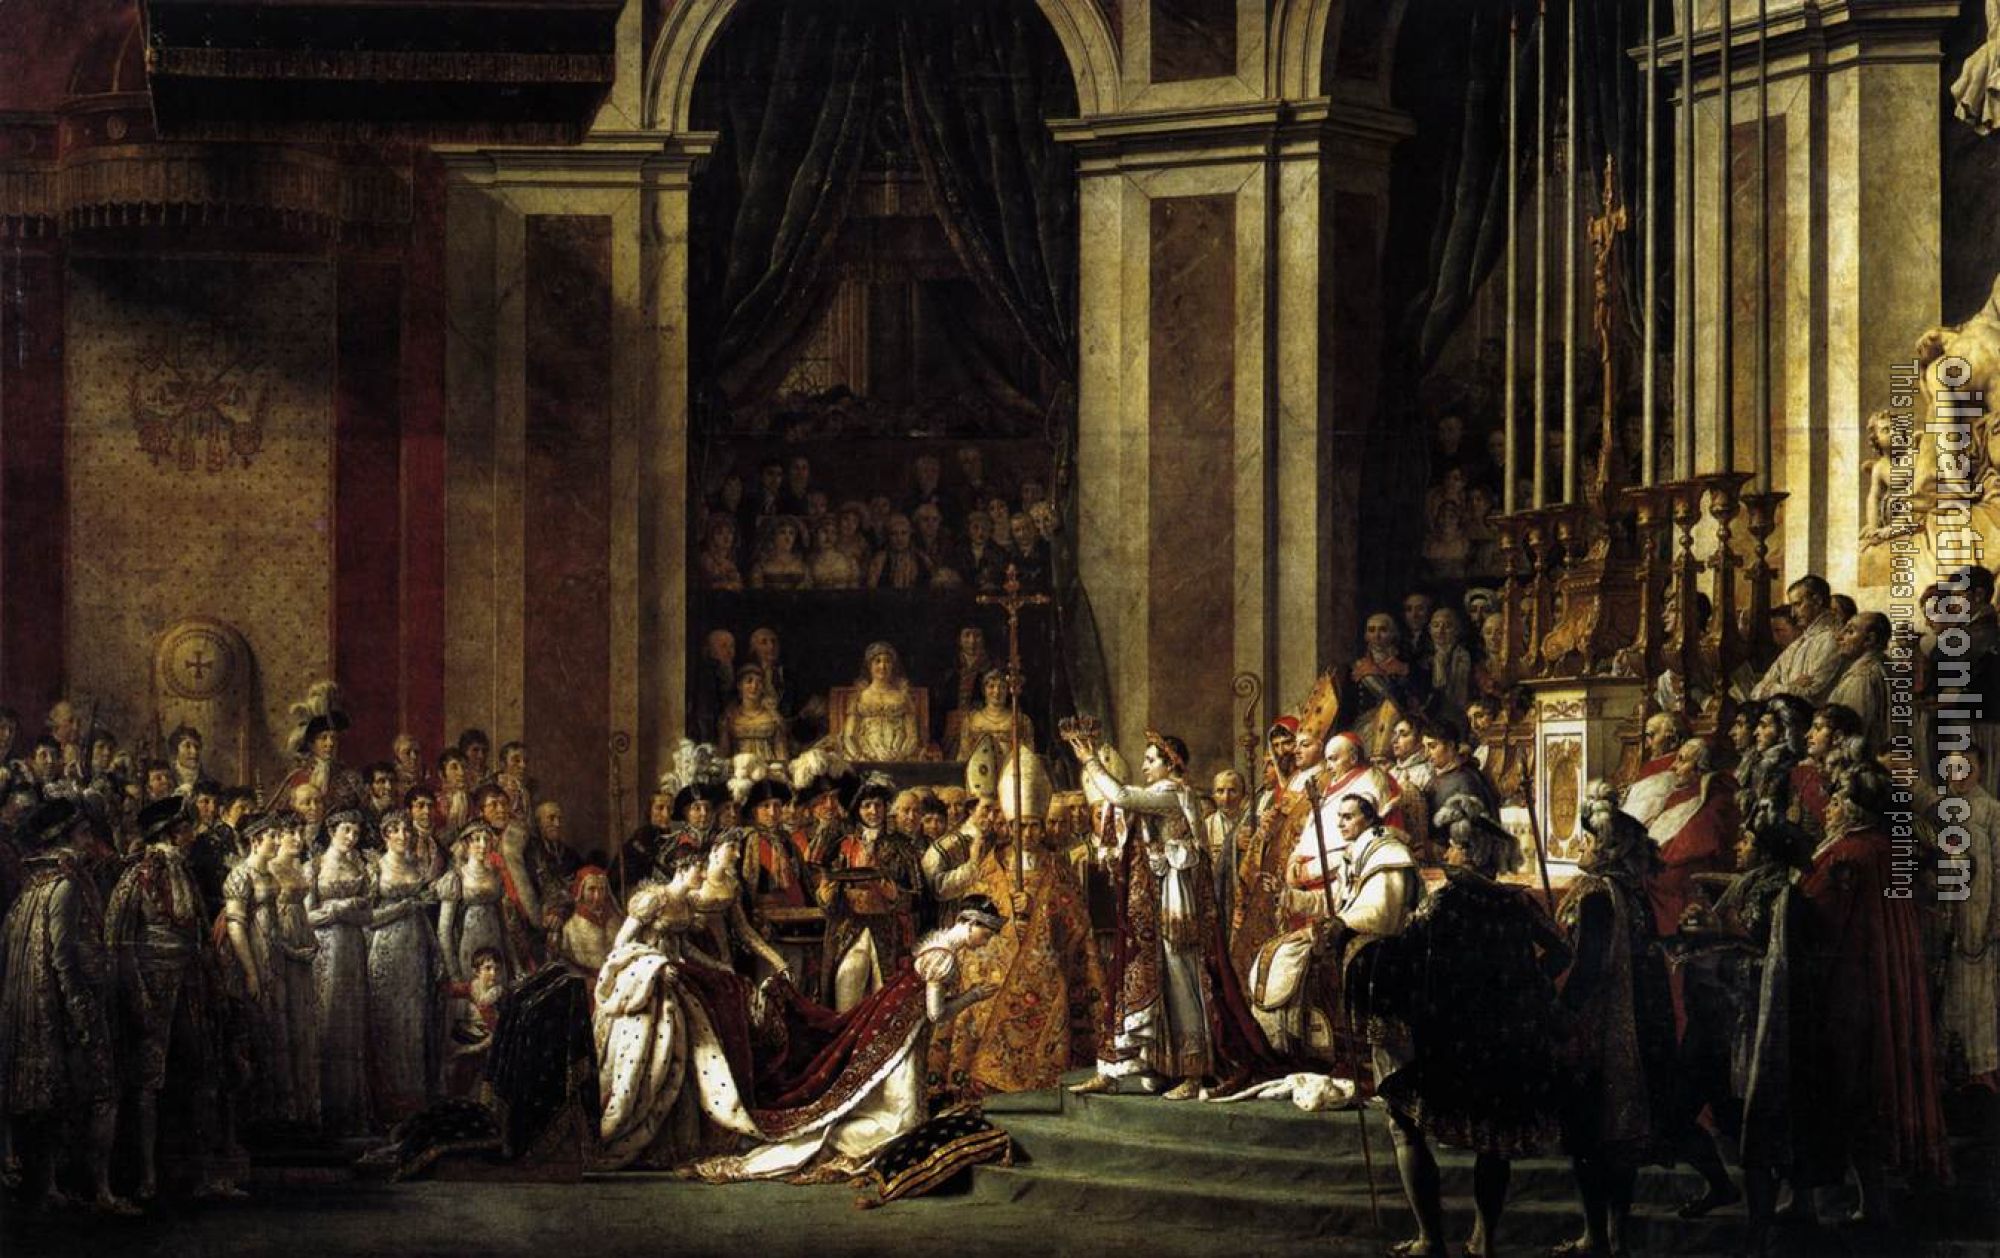 David, Jacques-Louis - Consecration of the Emperor Napoleon I and Coronation of the Empress Josephine